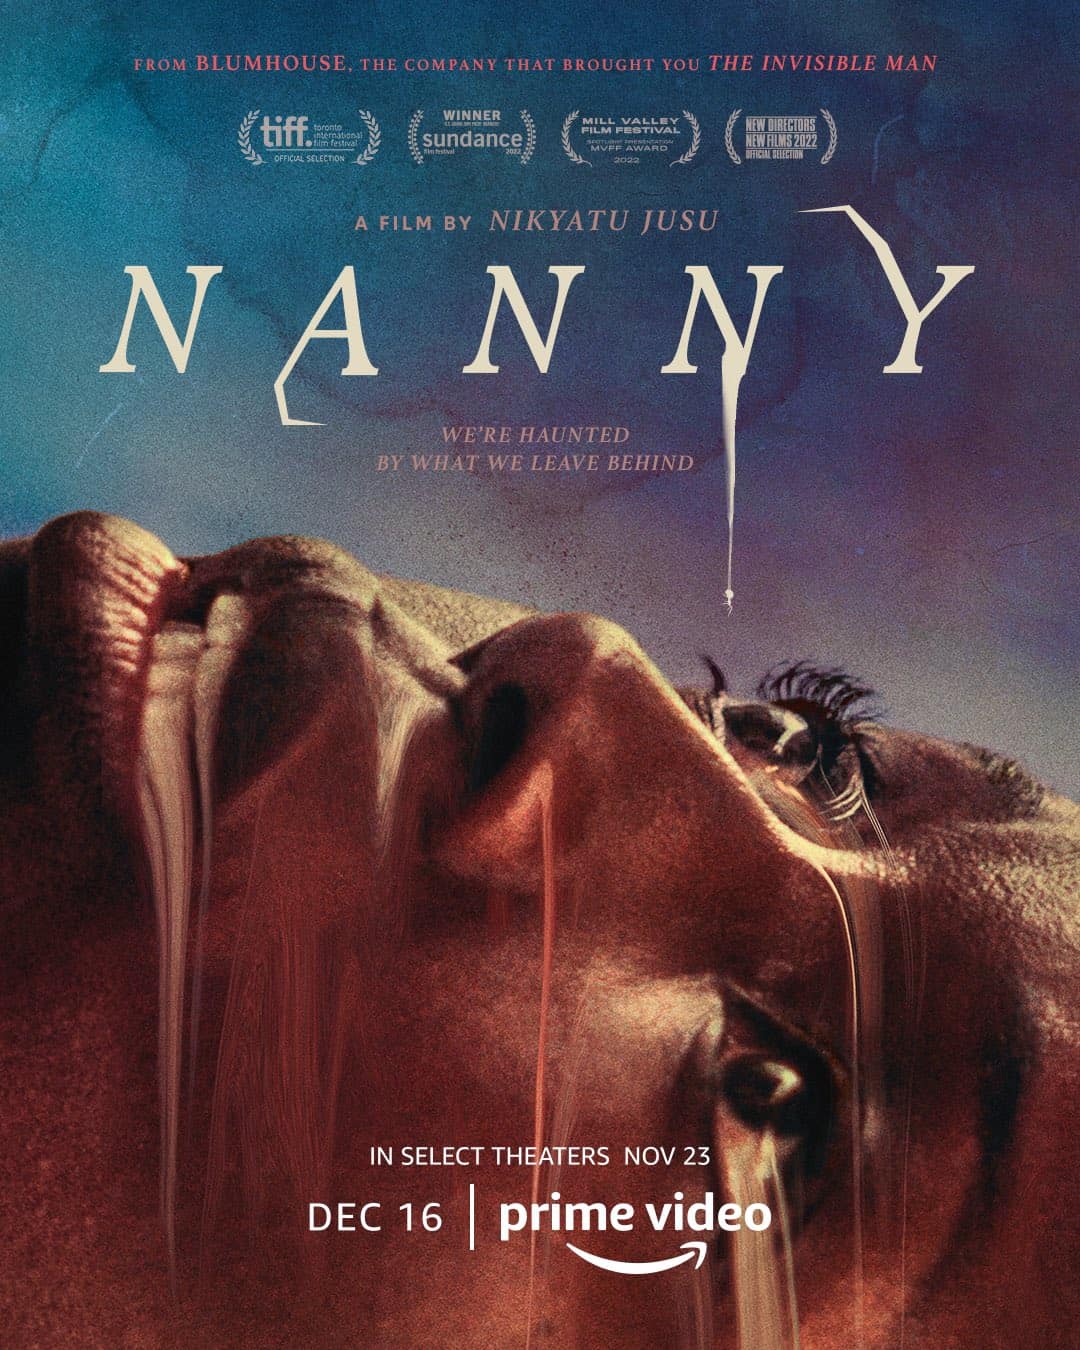 Grab Passes for an Early Screening of Nanny